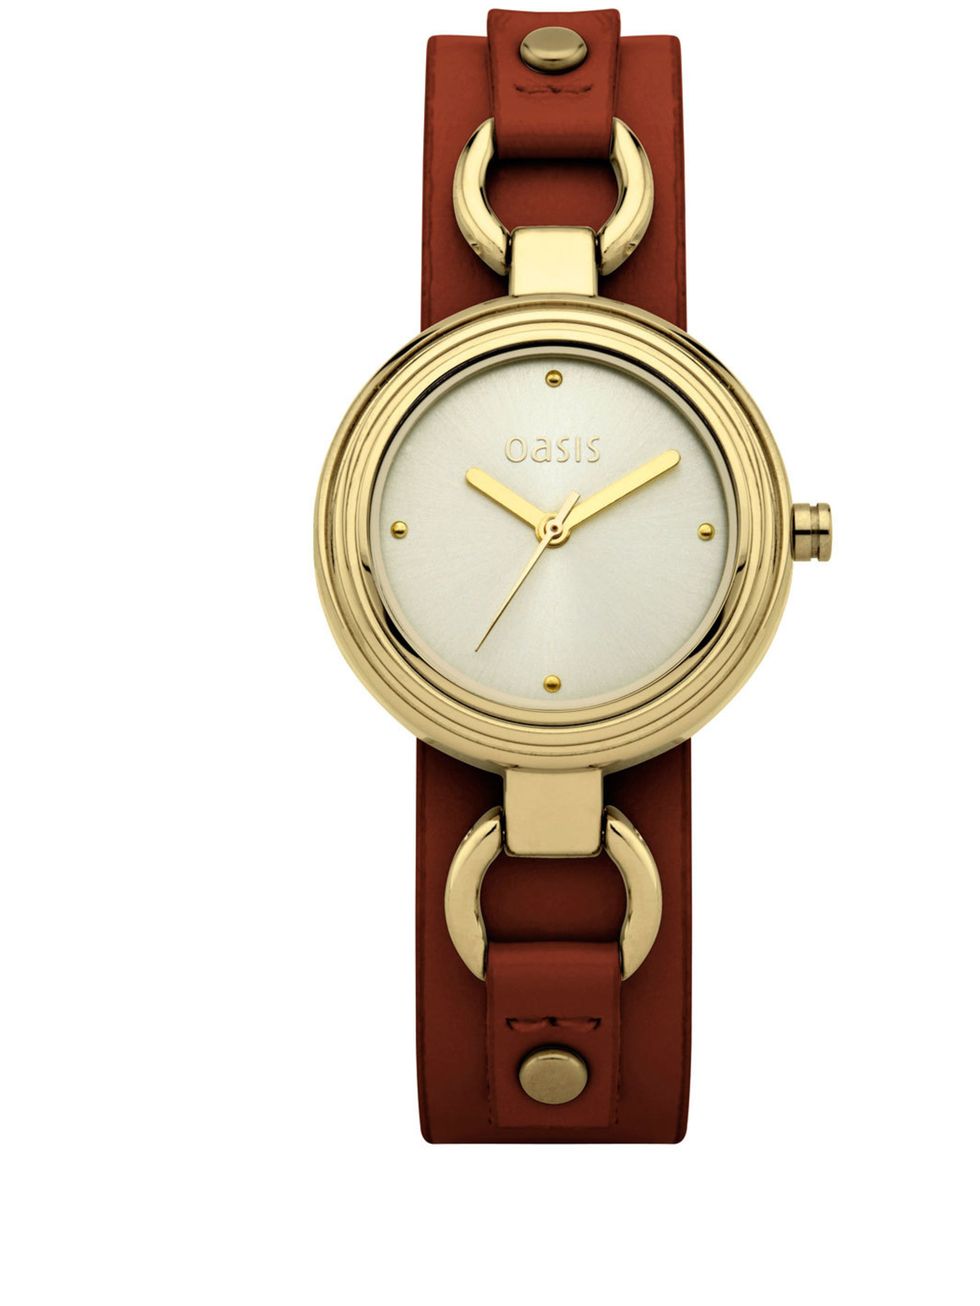 <p><a href="http://www.oasis-stores.com/?lng=en&amp;ctry=GB&amp;">Oasis</a> watch, £40</p>